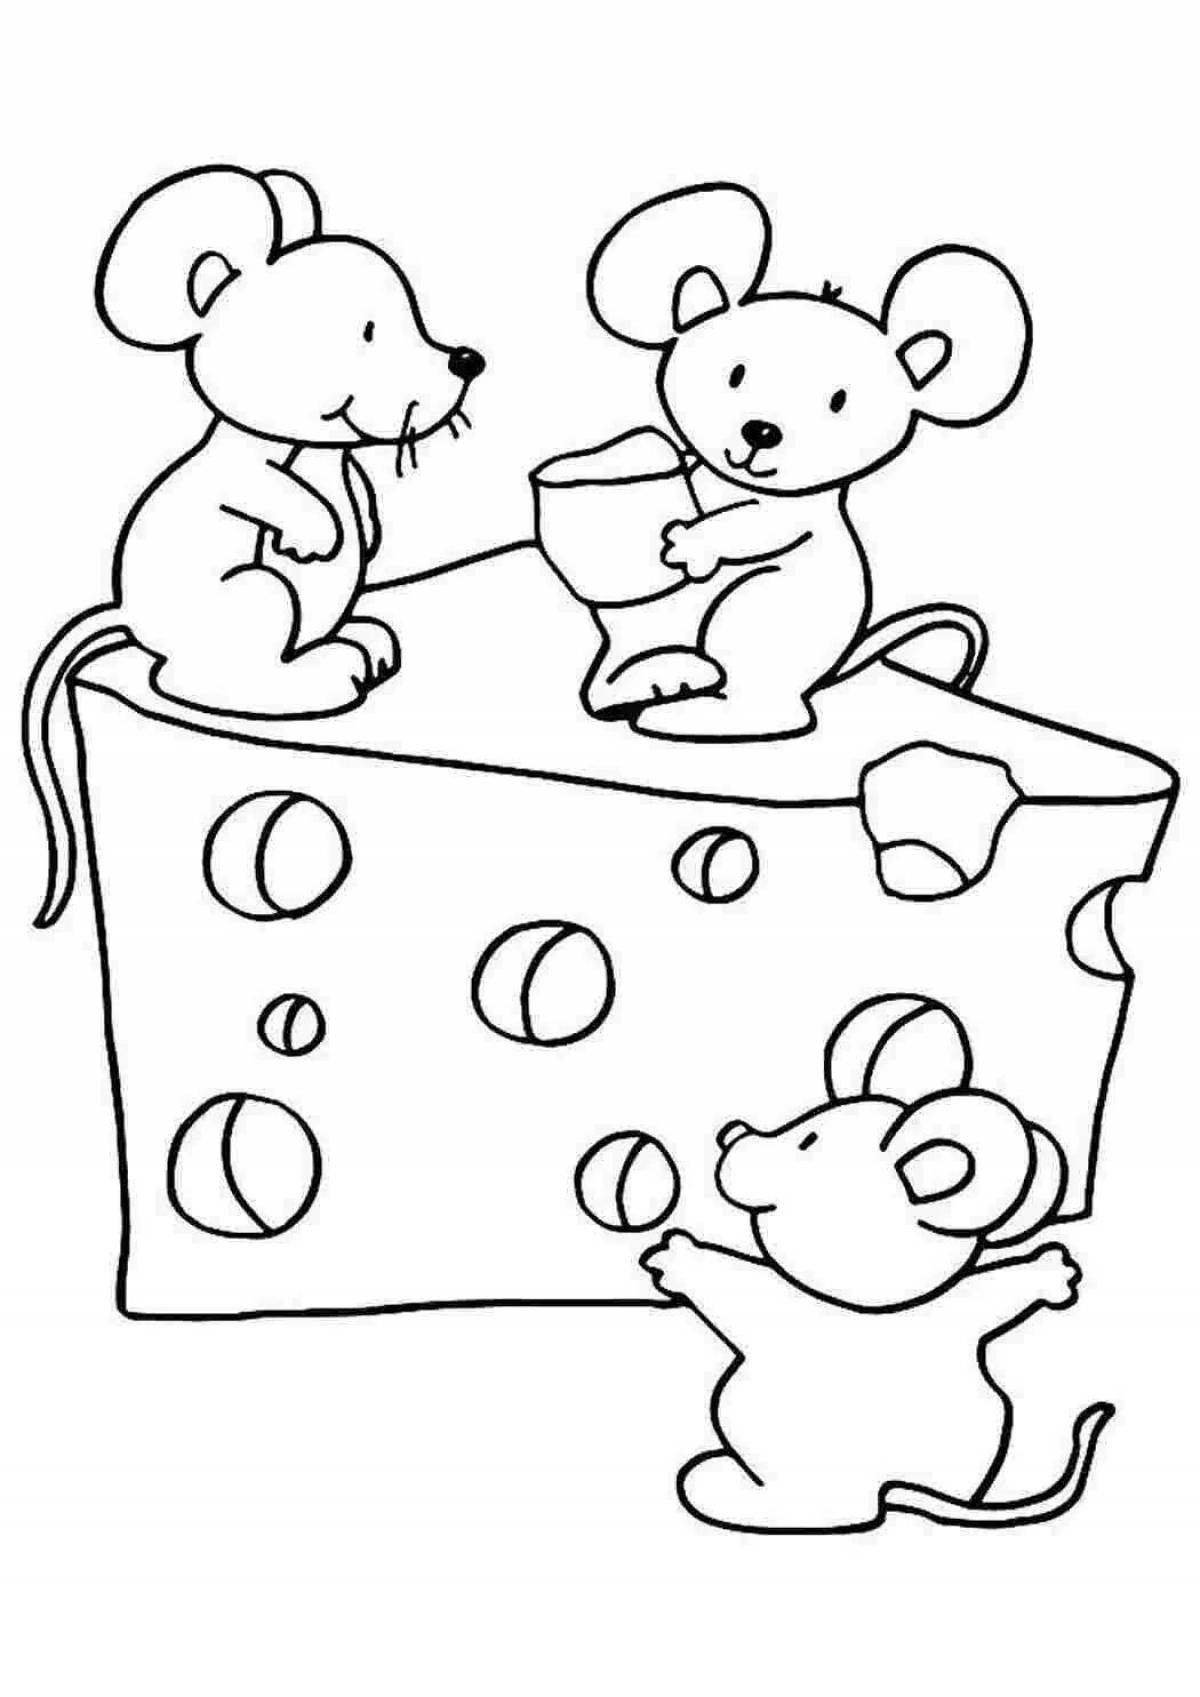 Live mouse and bear coloring book